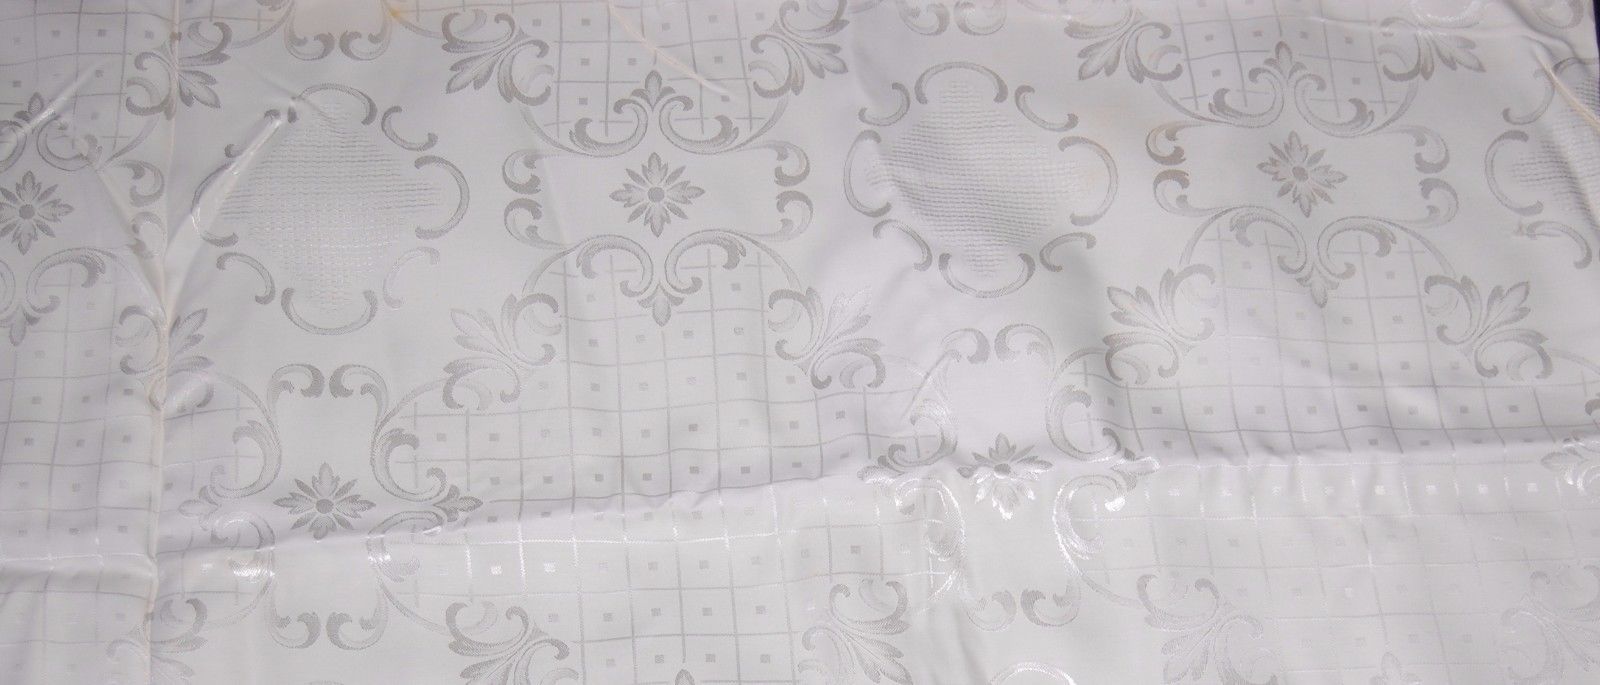 Vintage DAMASK UPHOLSTERY Fabric 3.5 Yards Ornate Woven Pearl White Jacquard